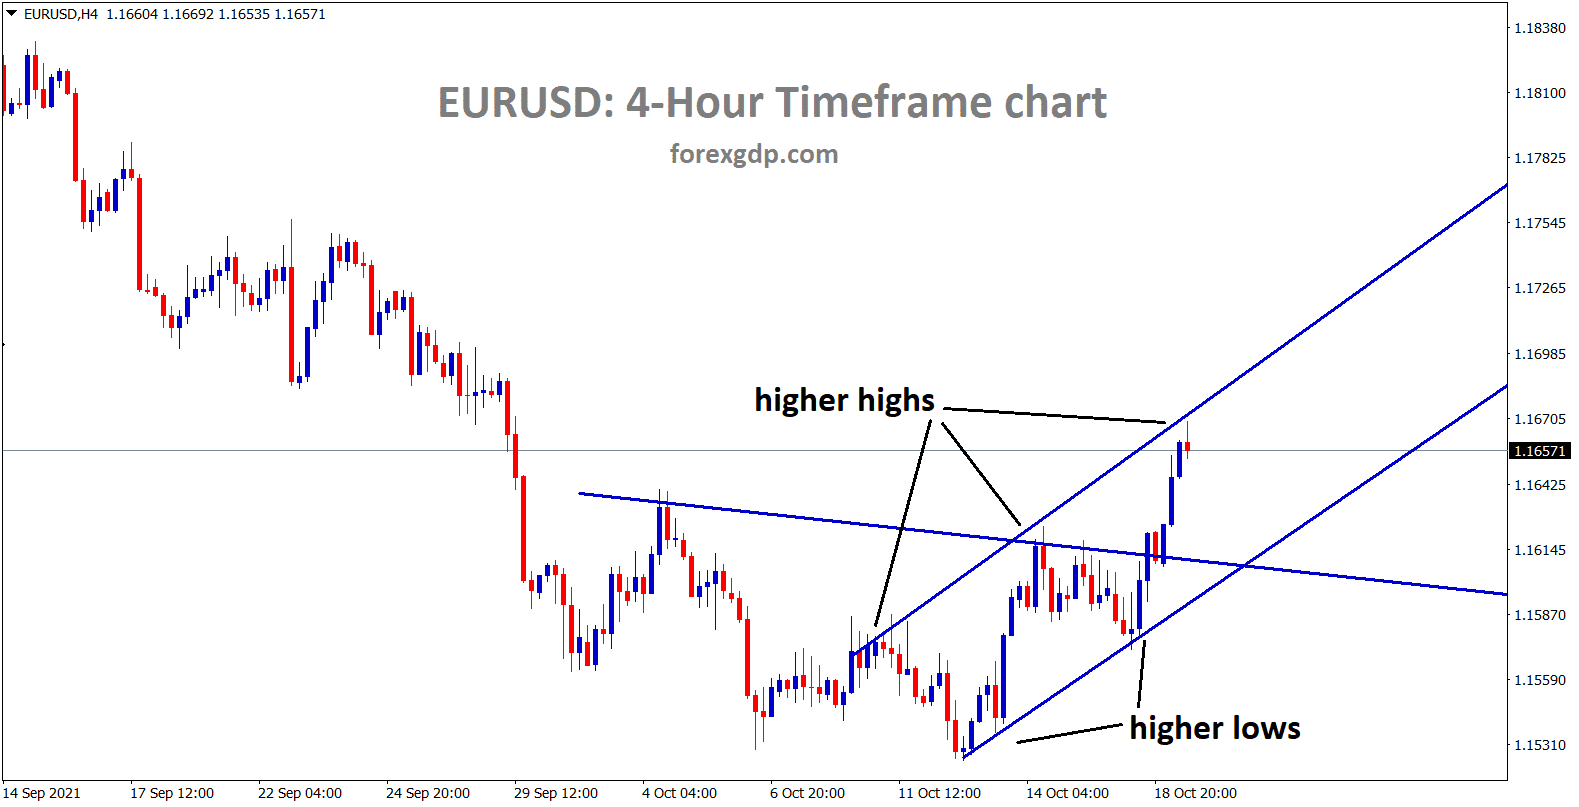 EURUSD is moving in an ascending channel now forming higher highs and higher lows